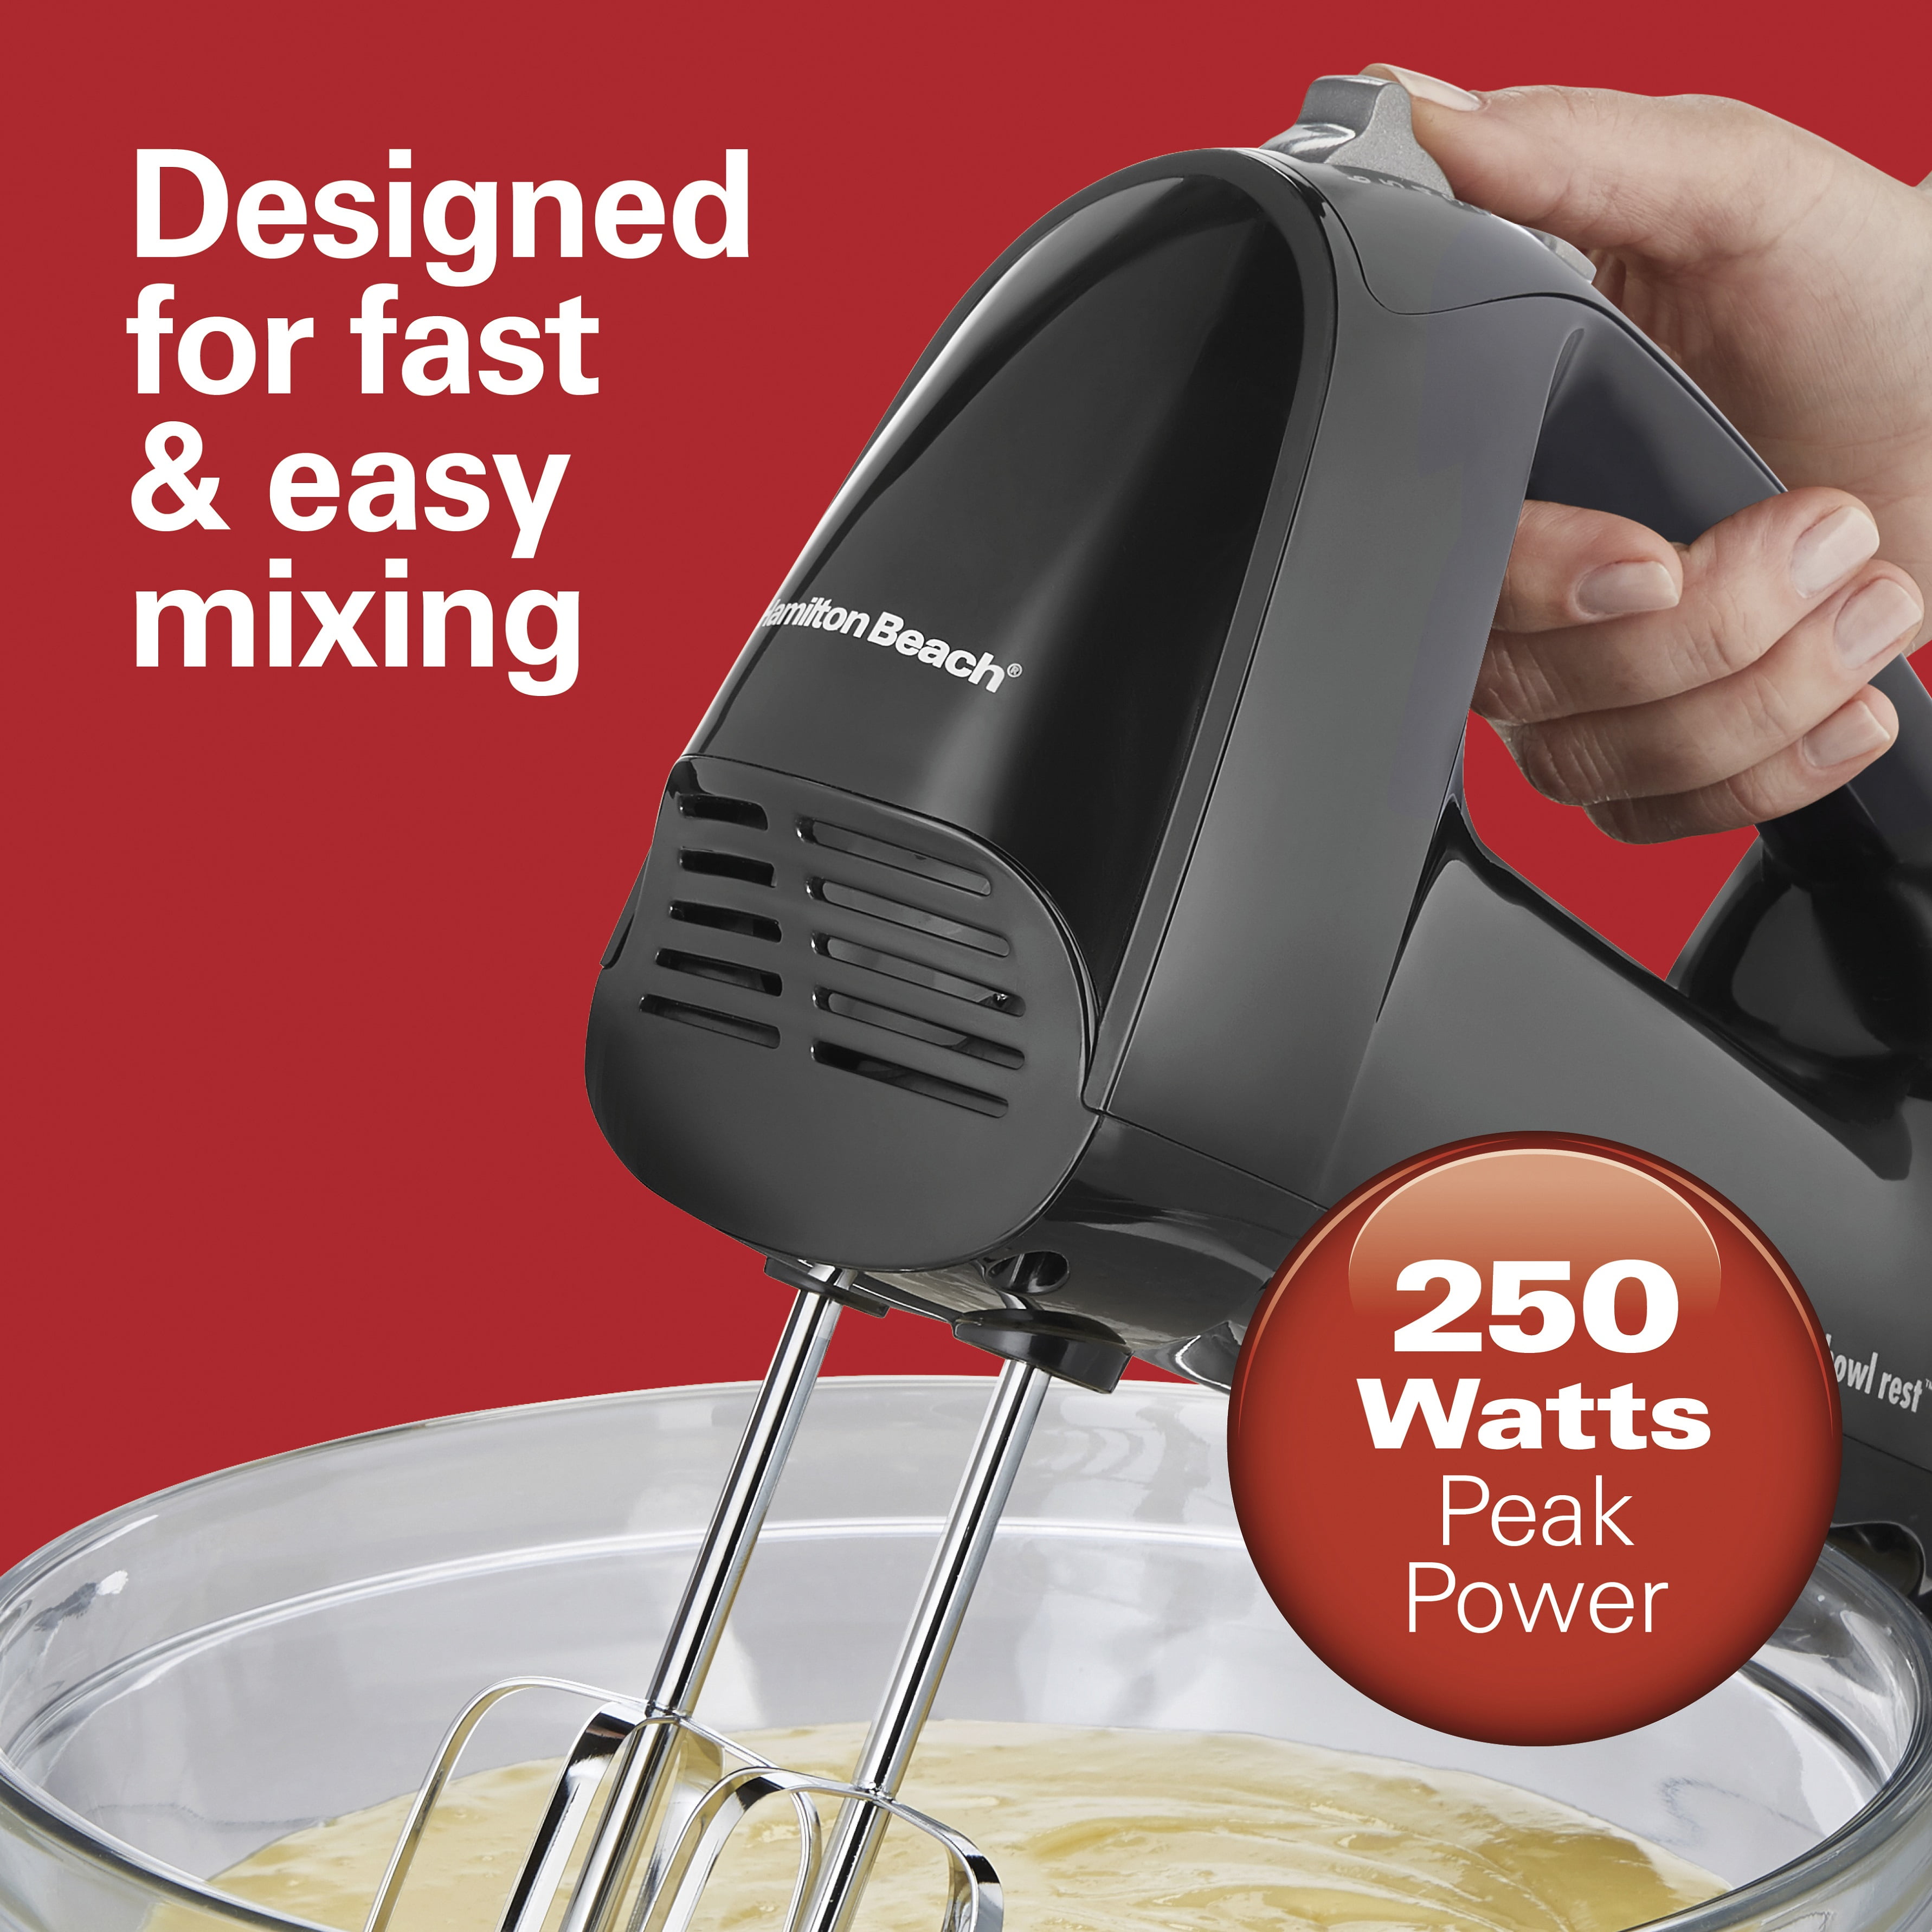 Hamilton Beach Electric Hand Mixer, 6 Speeds + Stir Button, 300 Watts of  Peak Power for Powerful Mixing, Includes Whisk and Storage Clip, Black